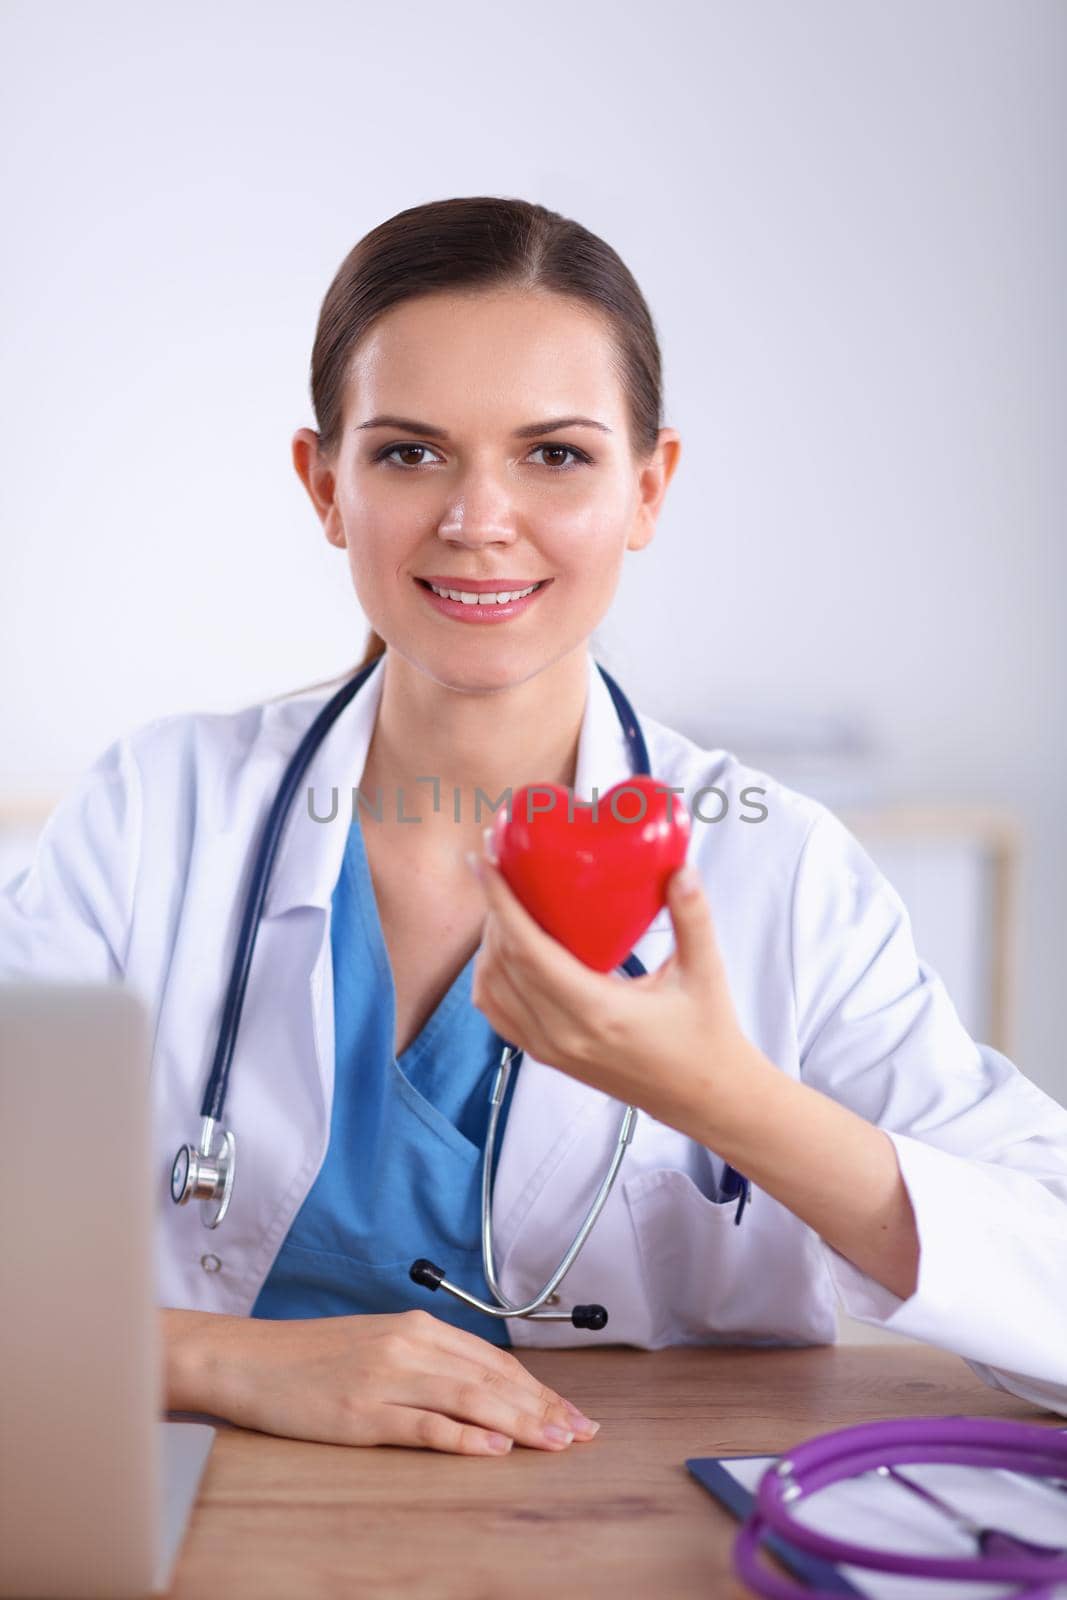 Young doctor with red heart symbol sitting at desk by lenetstan